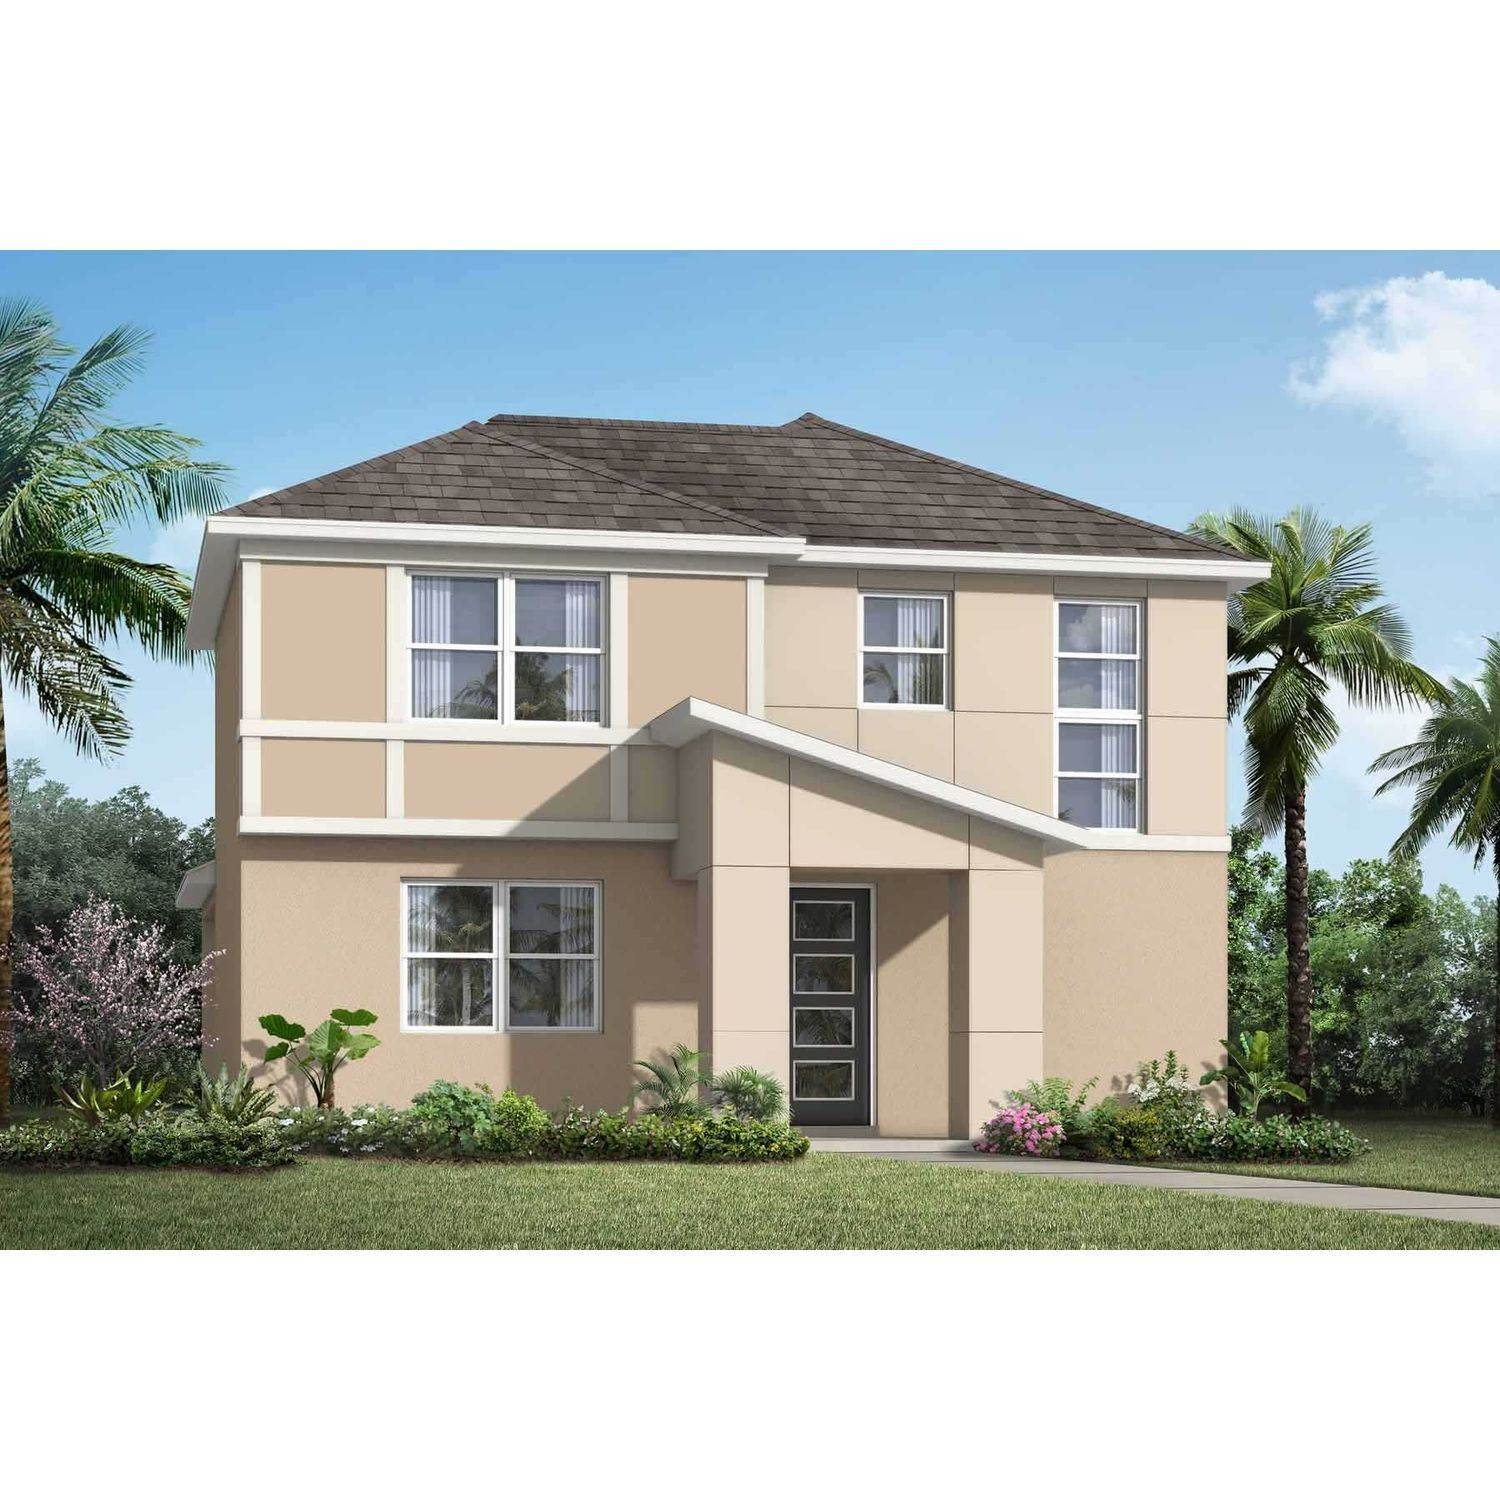 Single Family for Sale at Orlando, FL 32832